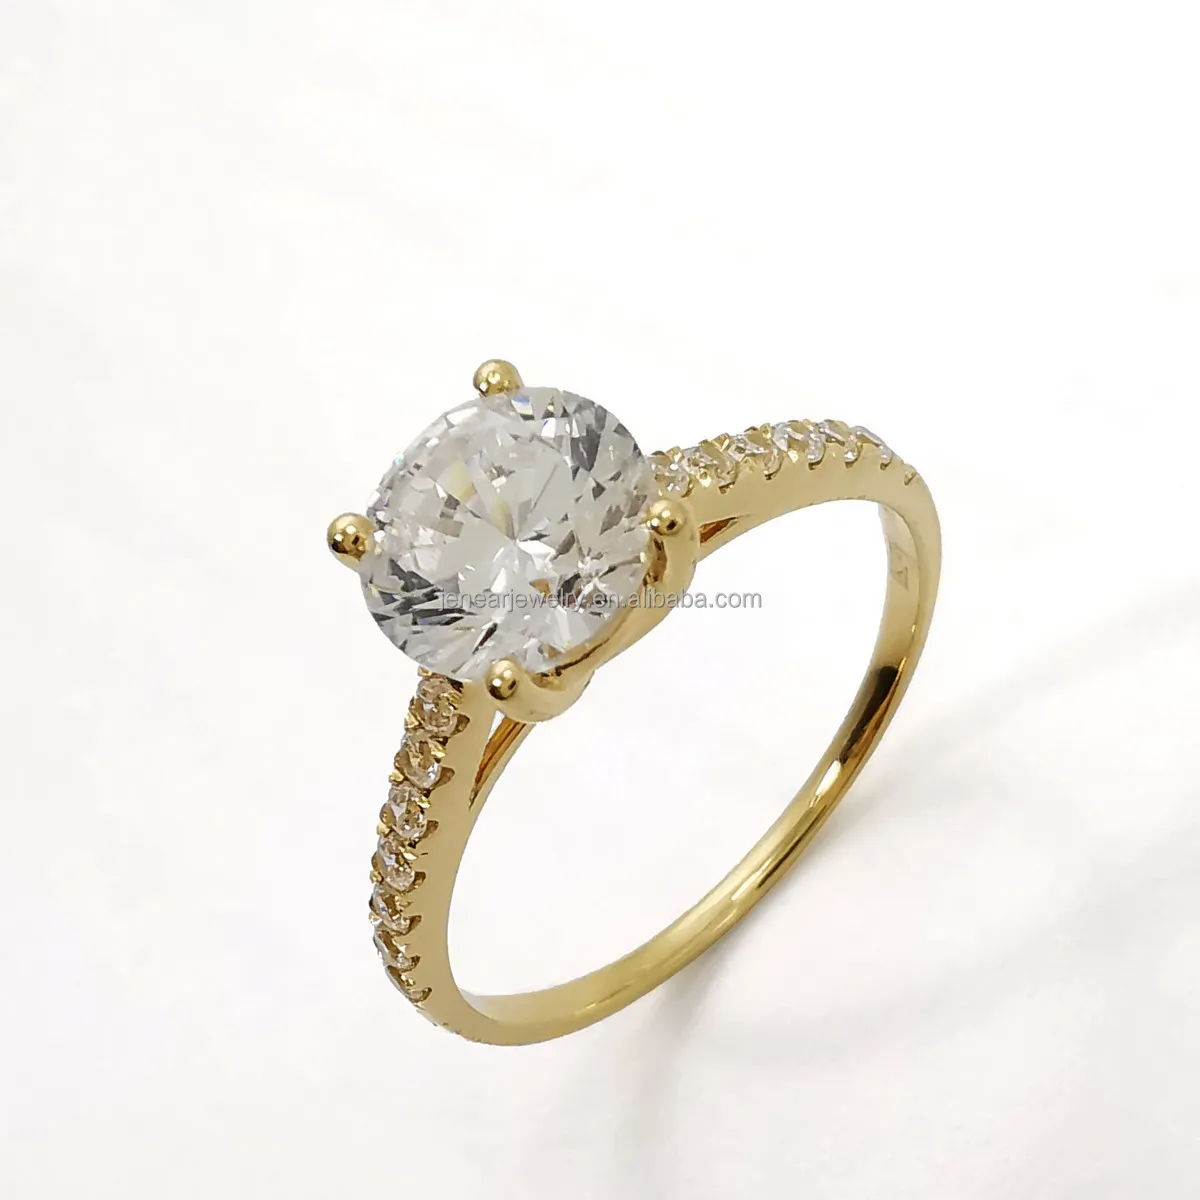 

Genuine solid 18k yellow gold ring AU750 18 carat gold lab created diamond ring solid real gold fake diamond ring